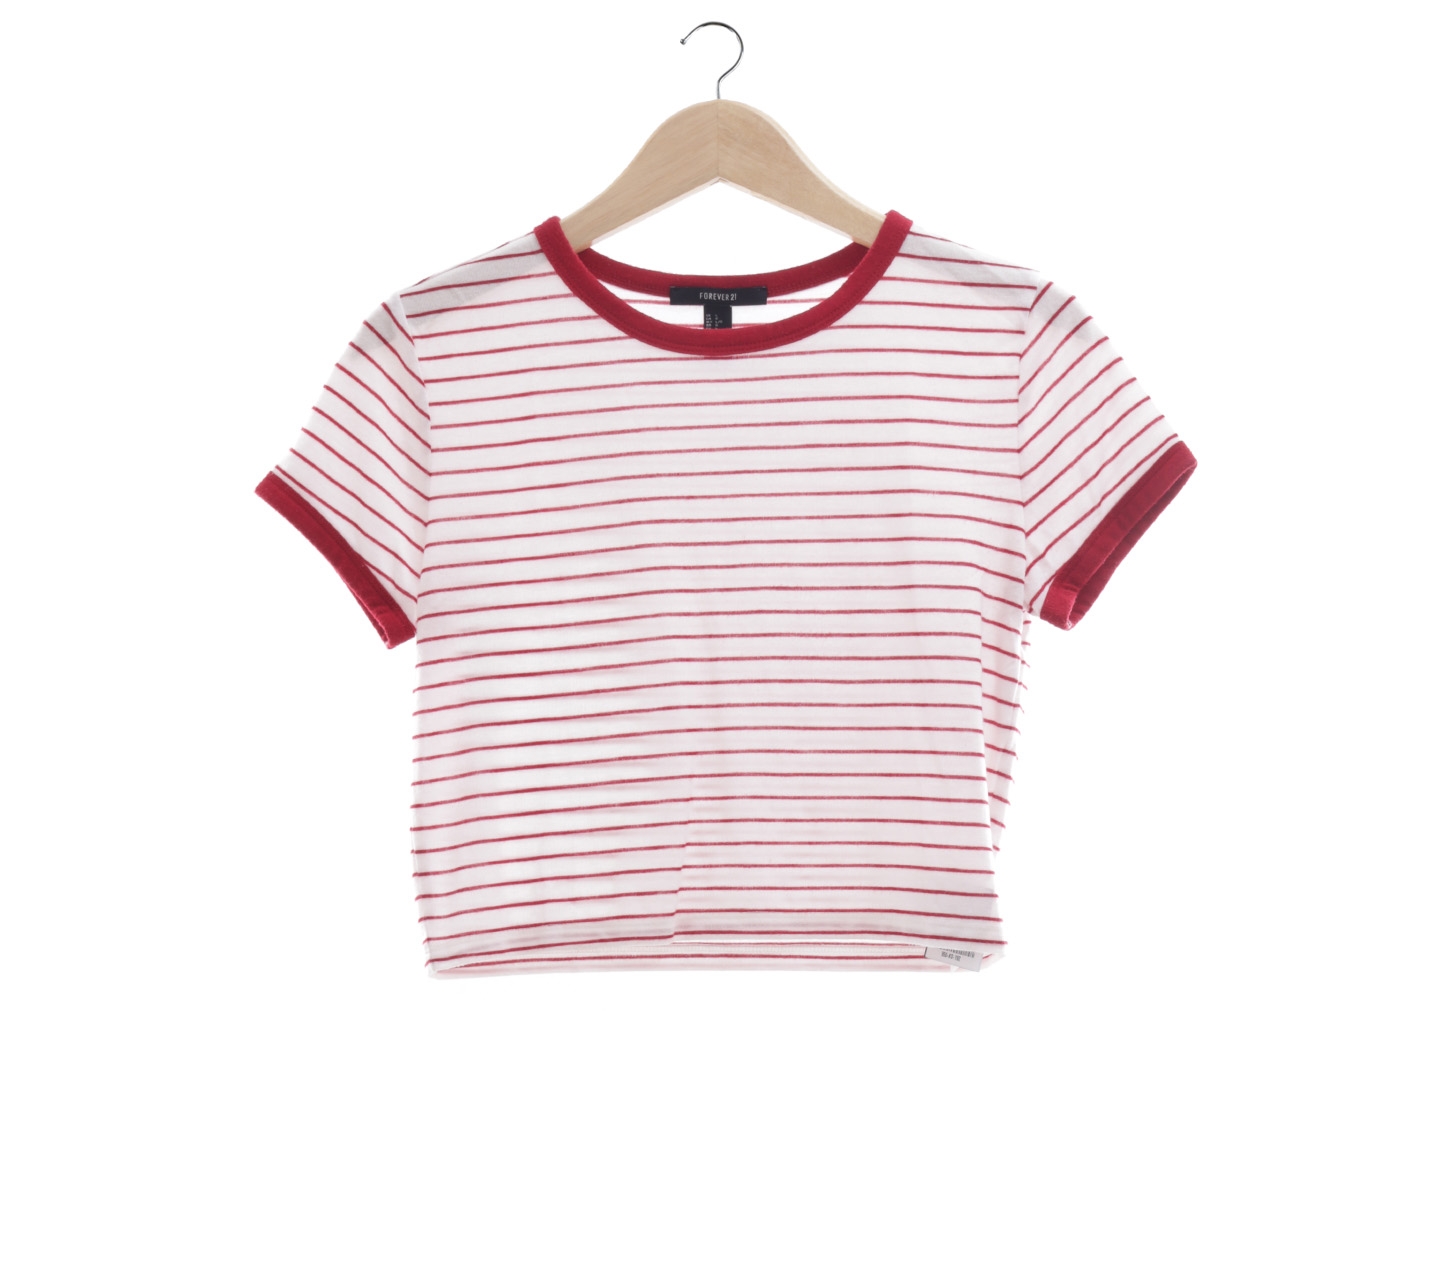 Forever 21 White & Red Striped T-Shirt